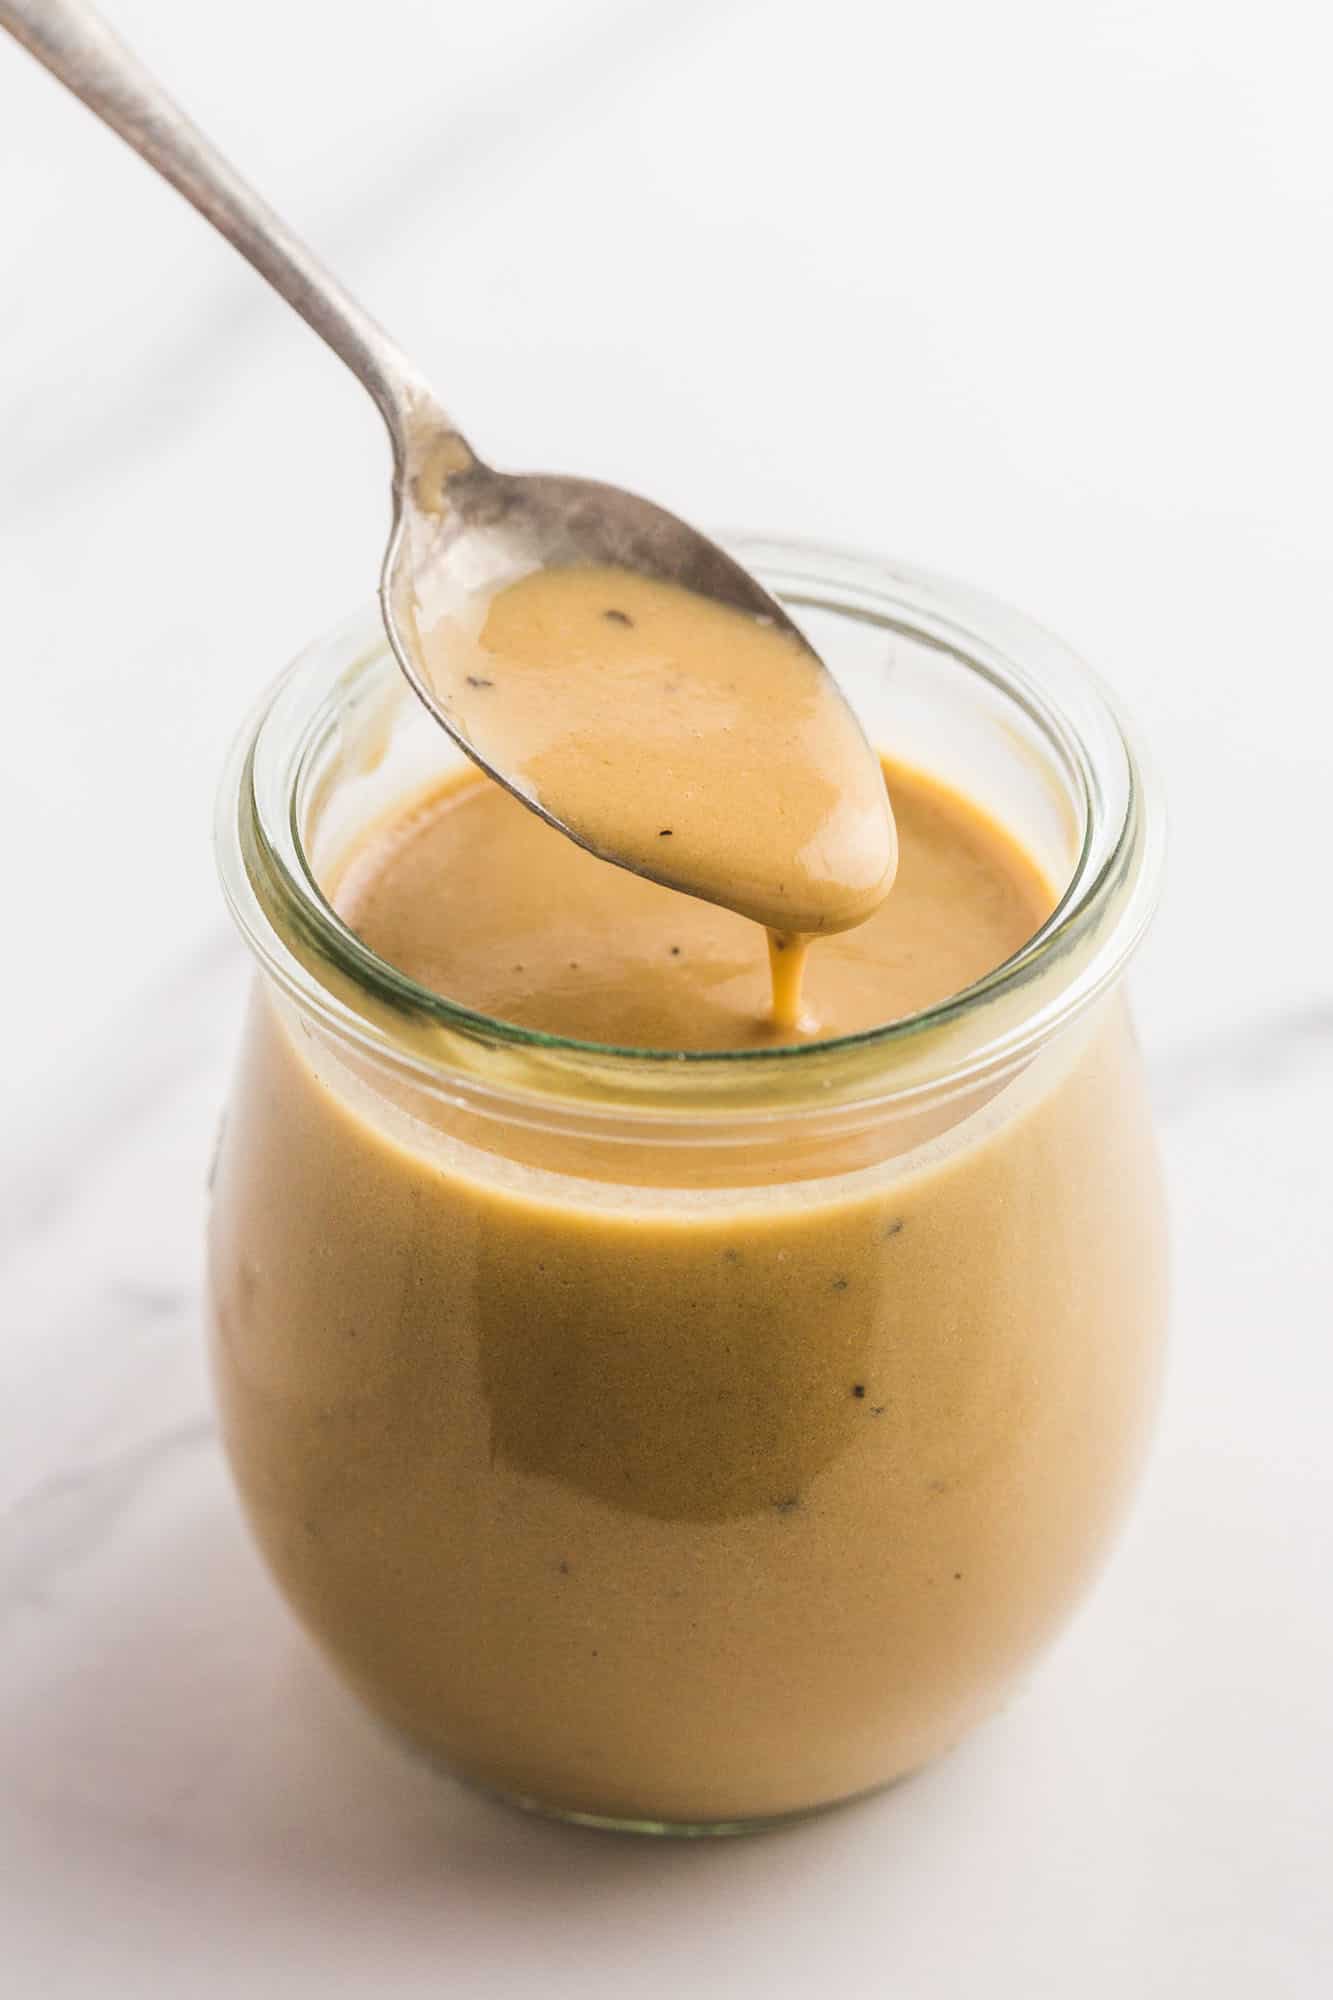 a small jar of creamy balsamic dressing being served with a teaspoon.